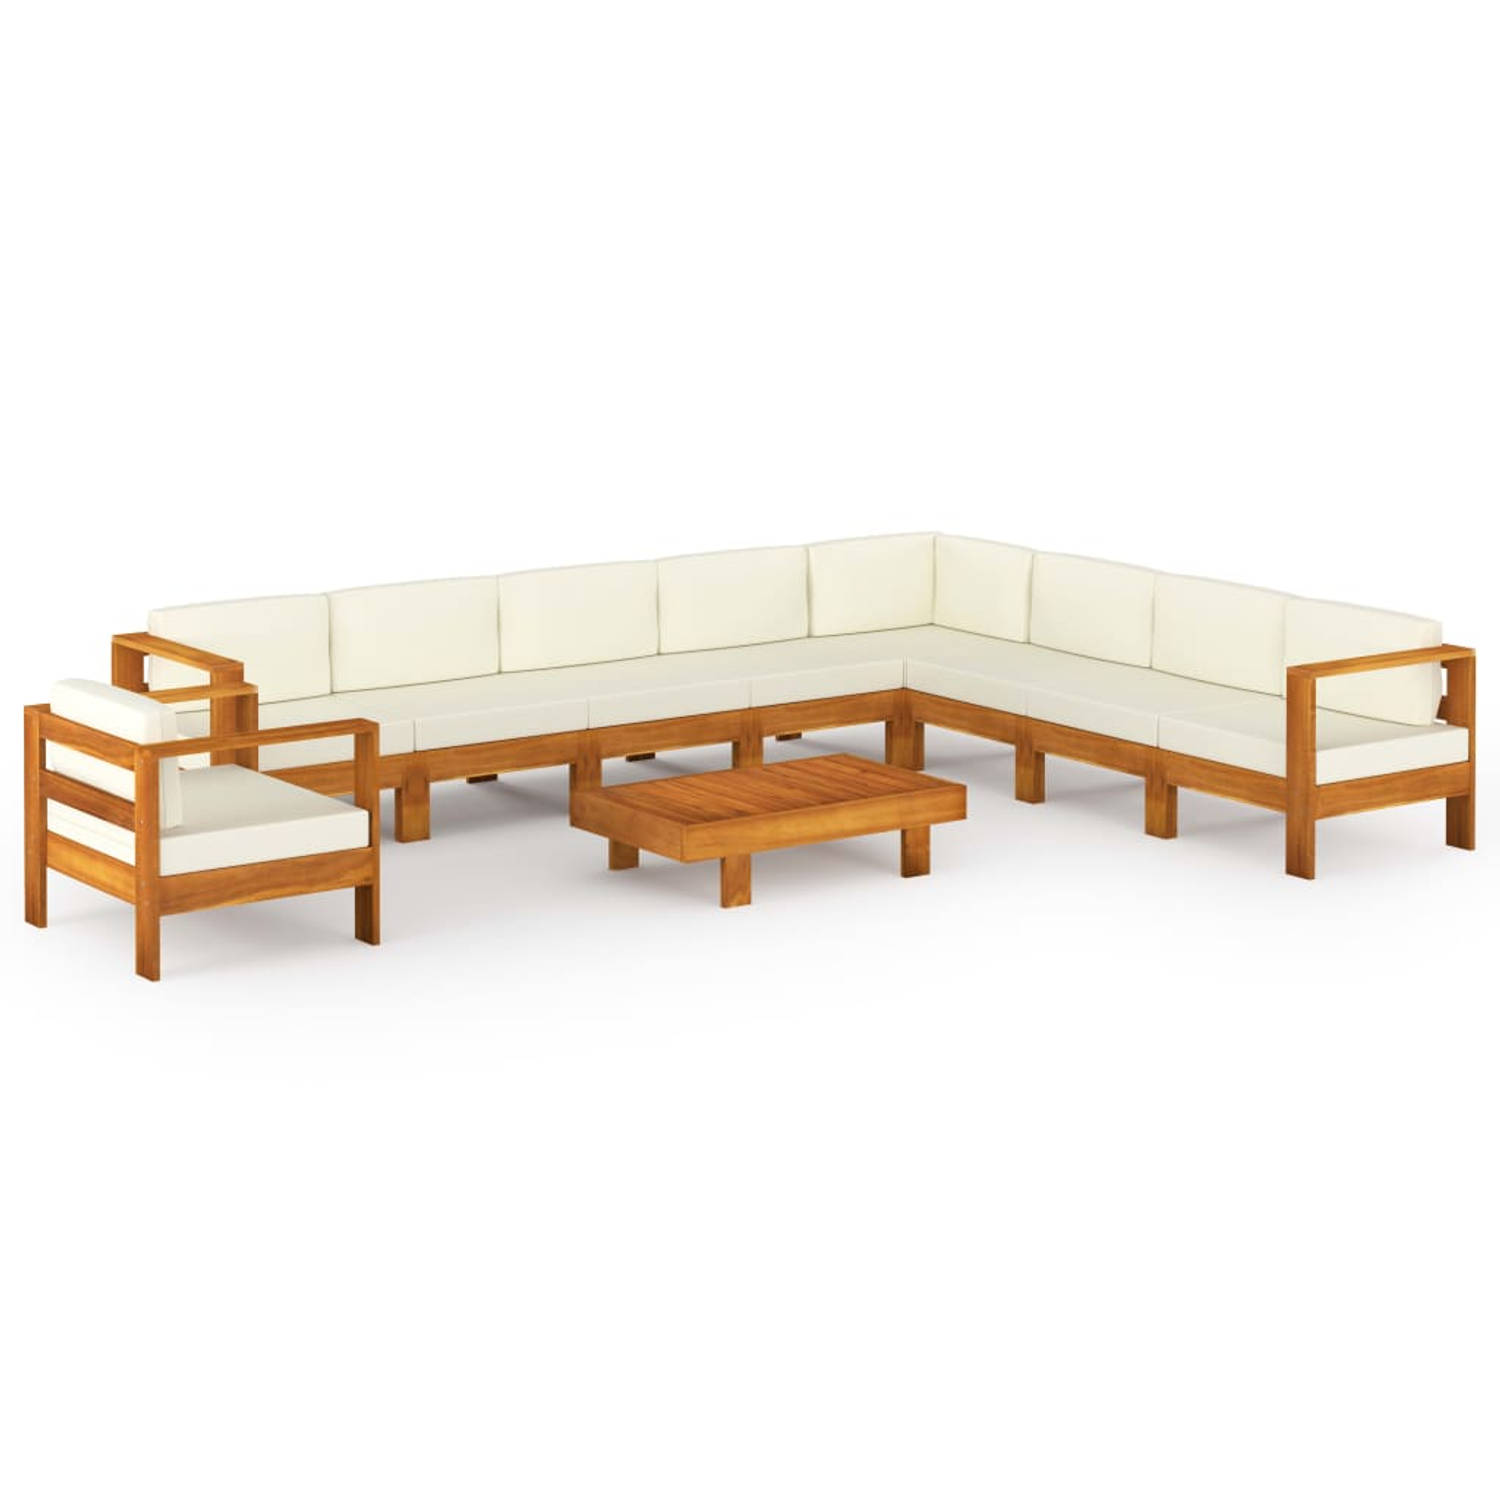 The Living Store 10-delige Loungeset met crèmewitte kussens acaciahout - Tuinset